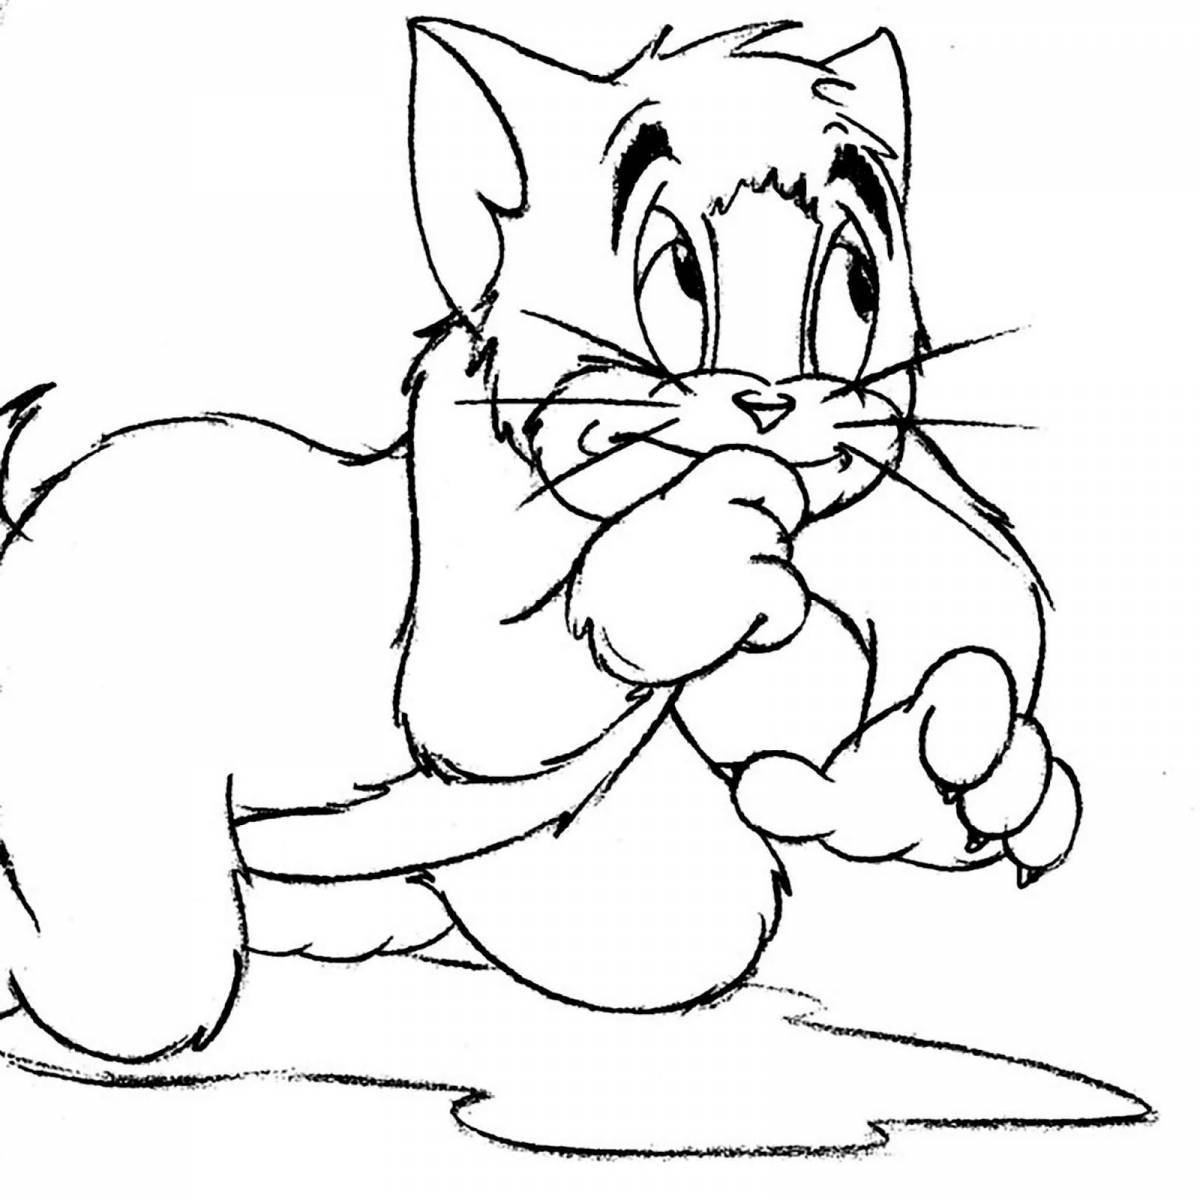 Tom the cat's live coloring page